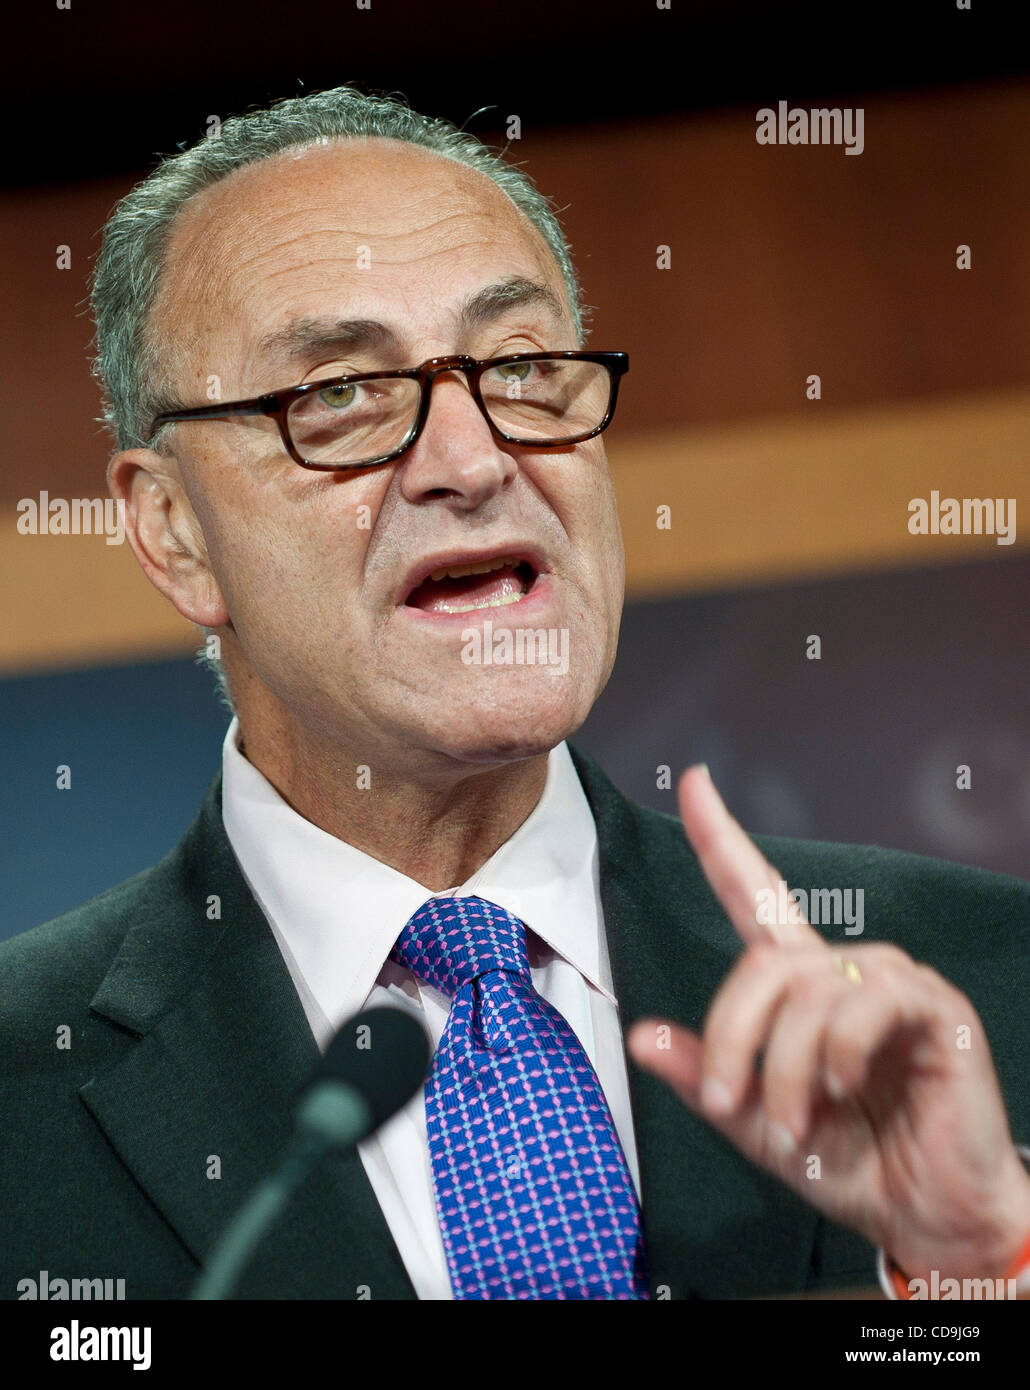 Jul 14, 2010 - Washington, District of Columbia, U.S., -  Senator Charles Schumer speaks to the press urging the British government to investigate whether BP a hand in securing the release of Lockerbie bomber al-Megrahi in order to help close a 00-million offshore oil drilling deal with Libya. (Cred Stock Photo